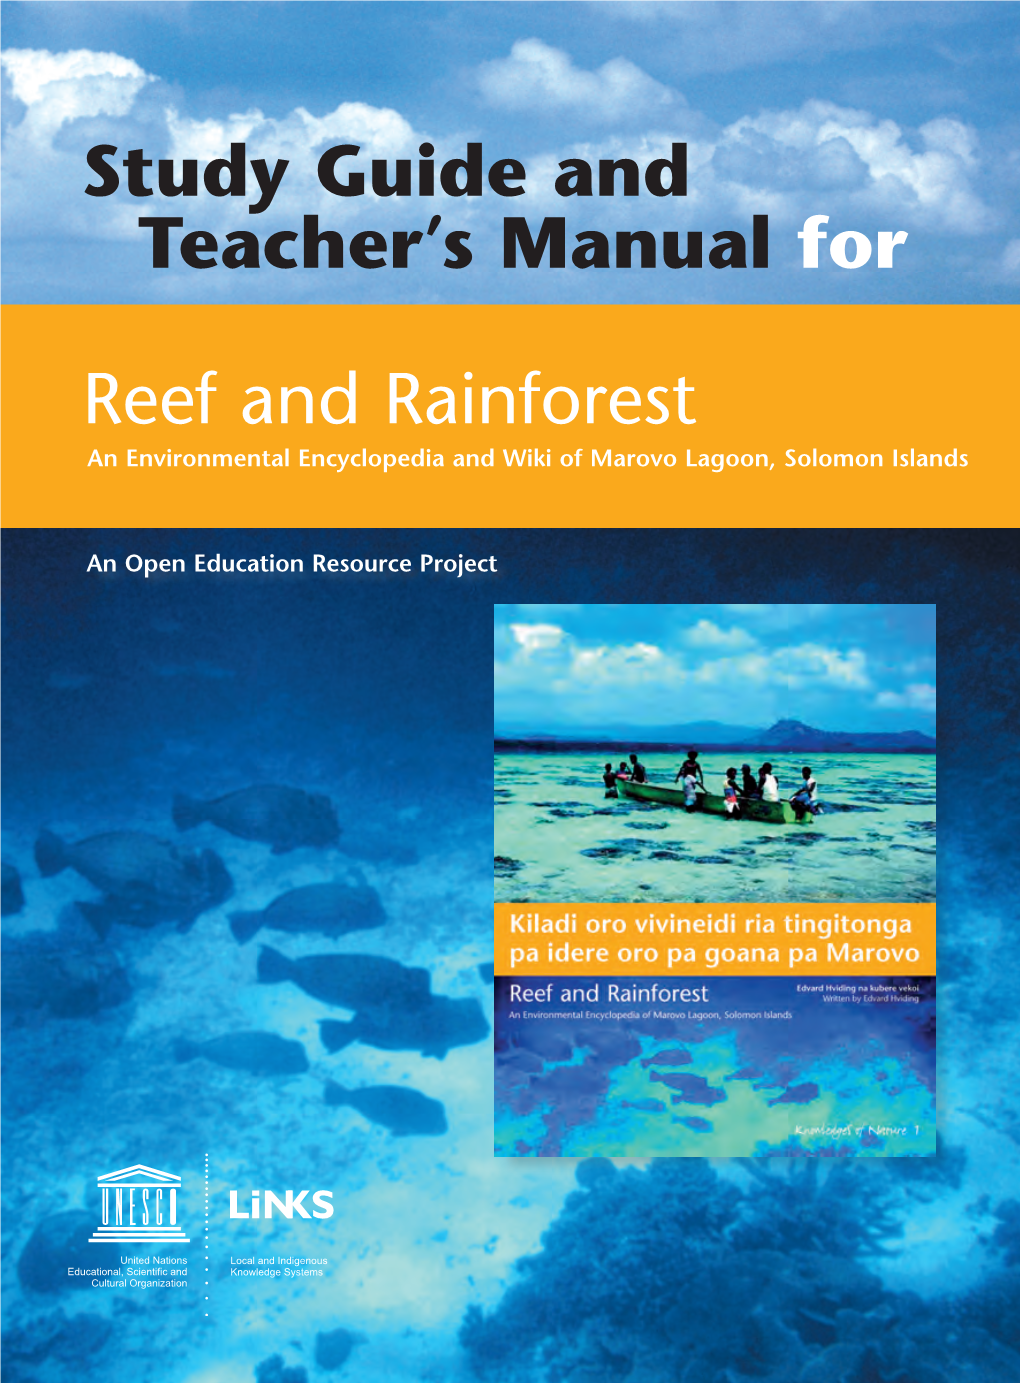 Study Guide and Teacher's Manual for Reef and Rainforest